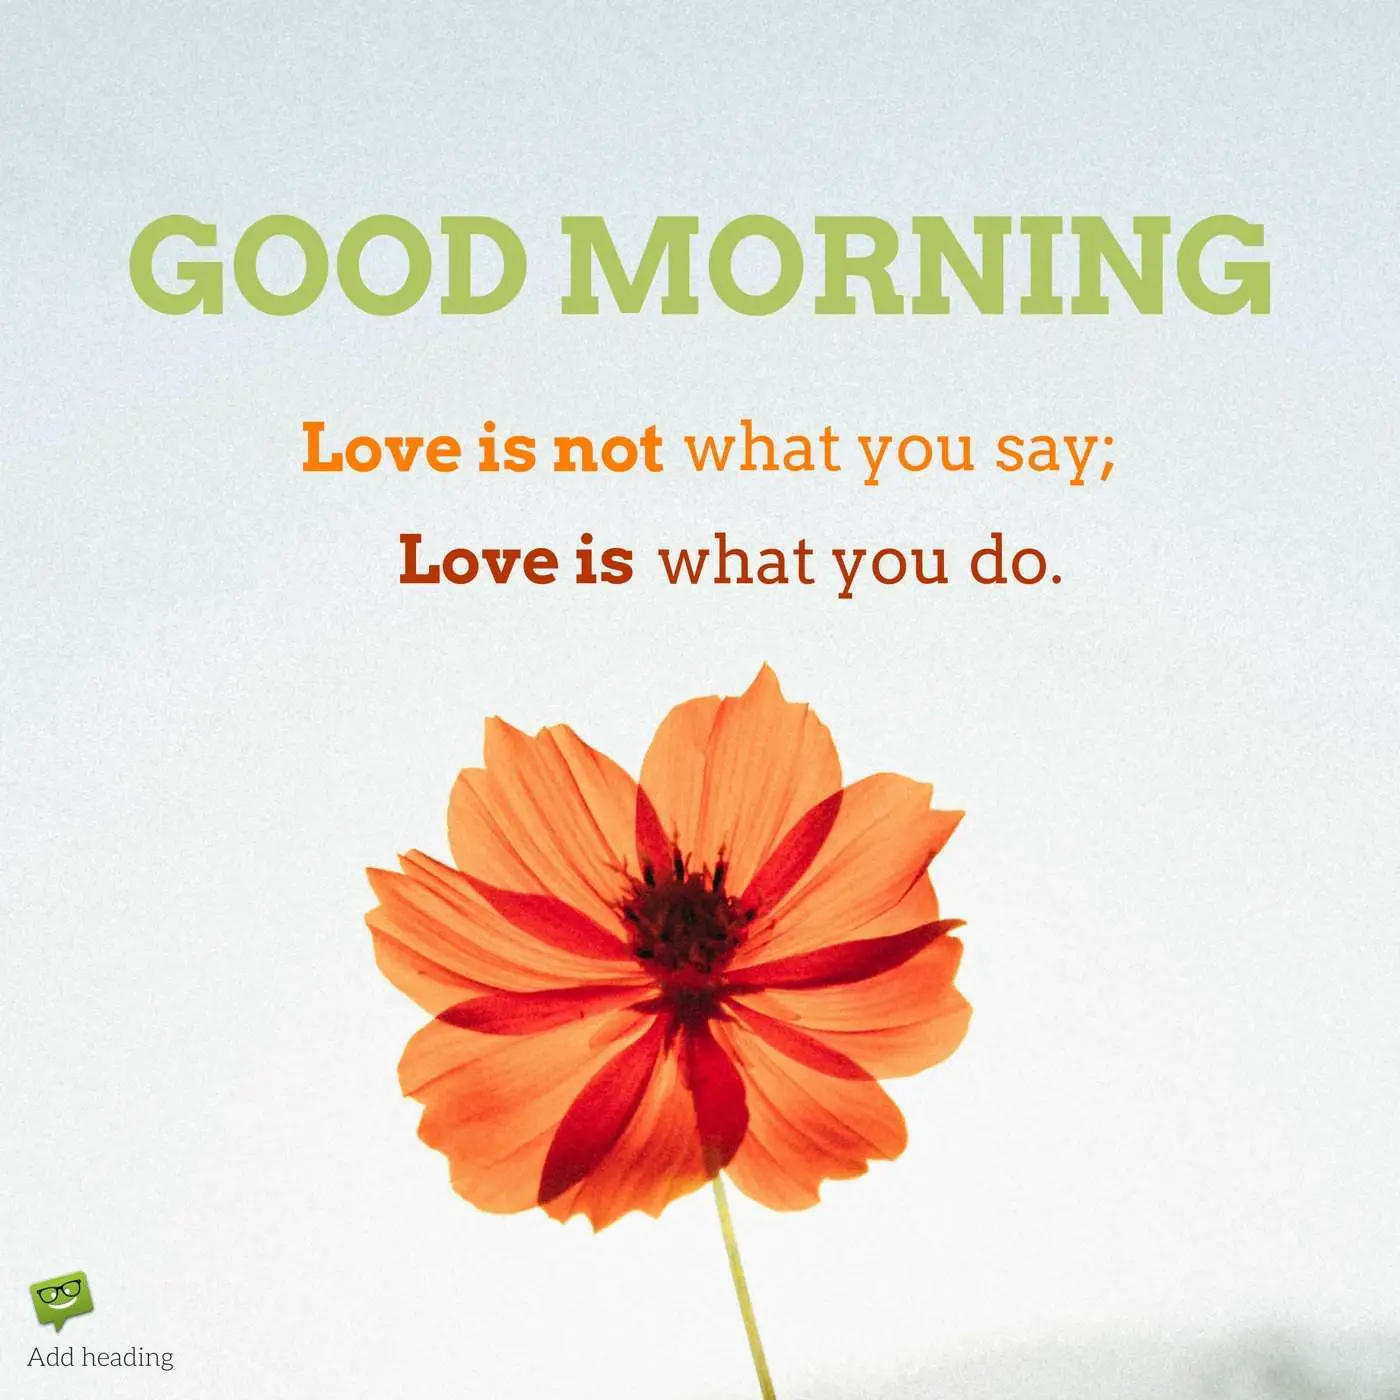 Good Morning Love is not what you say Love is what you do